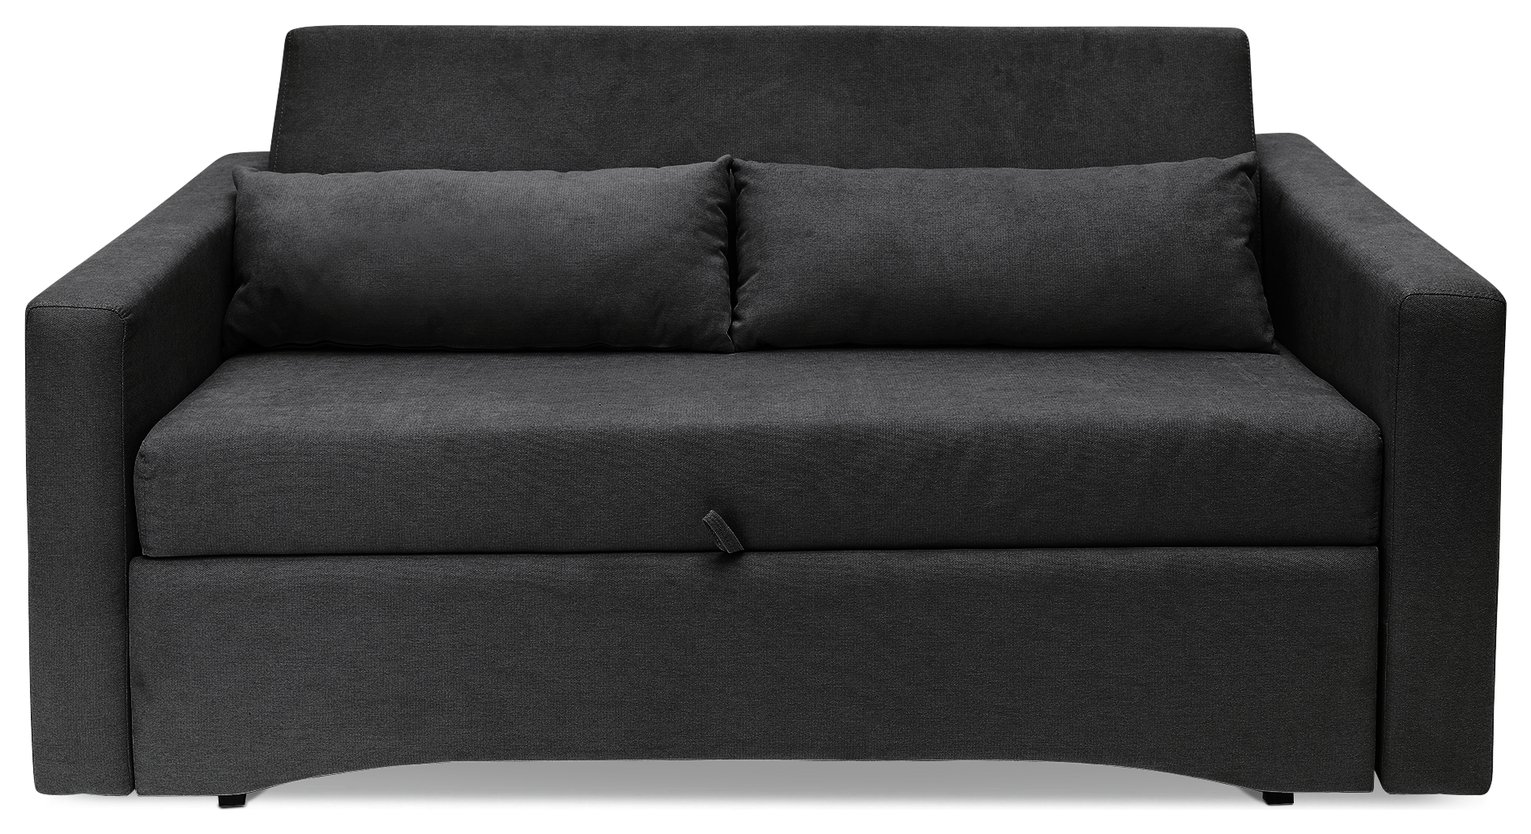 Review of HOME Reagan 2 Seater Fabric Sofa Bed - Charcoal